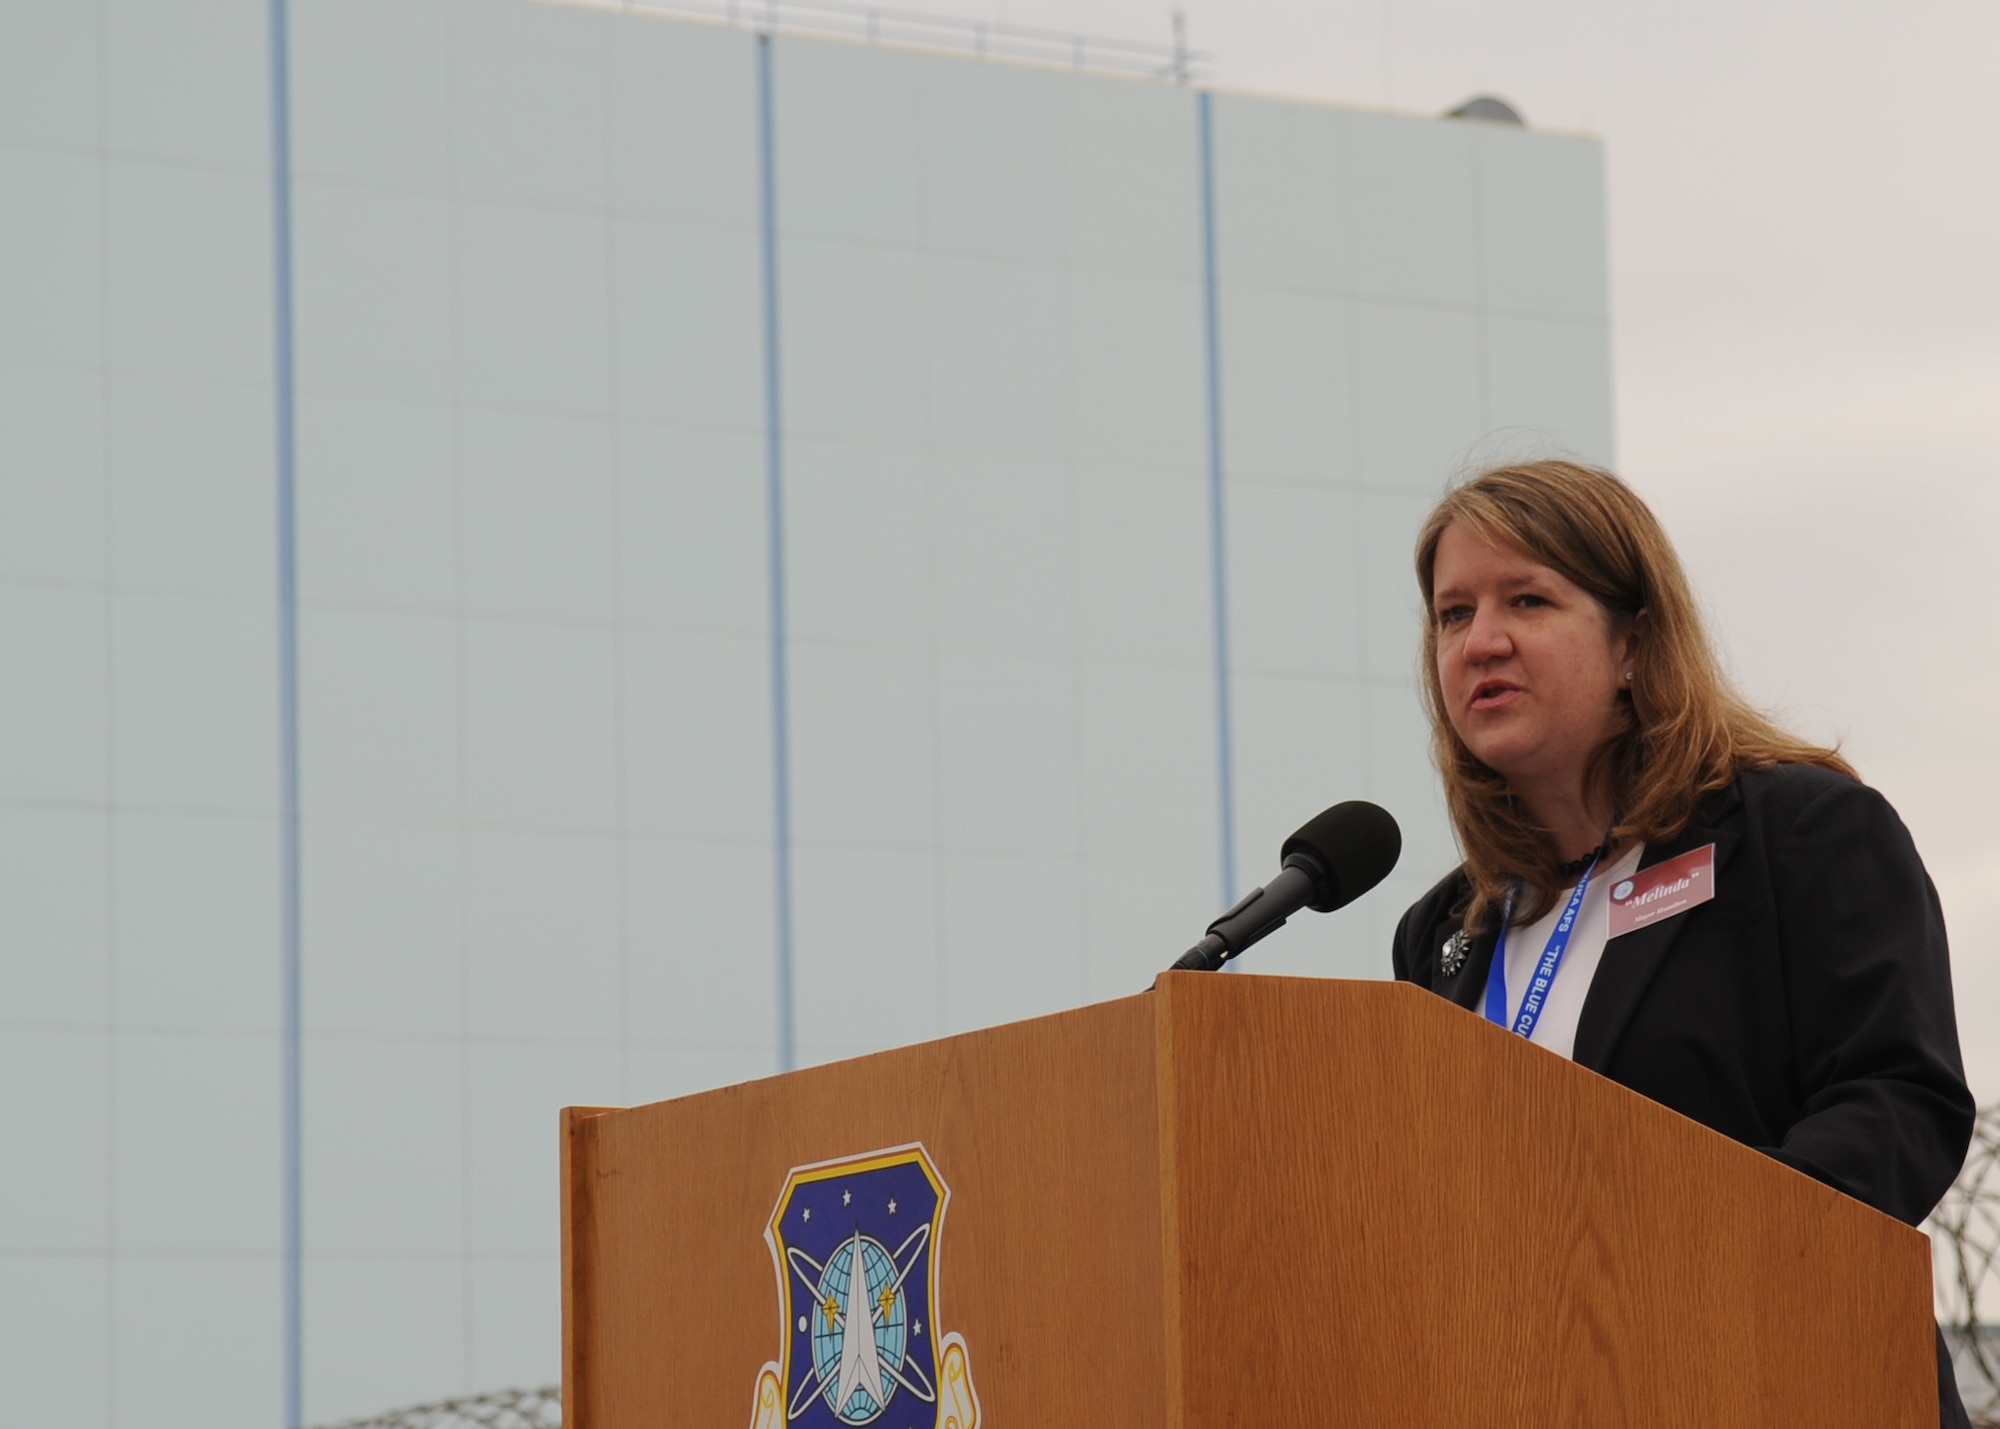 SUNNYVALE, Calif.-- Mayor Melinda Hamilton delivers a speech during the Onizuka Air Force Station closure ceremony here July 28, 2010. Built in 1960, Onizuka AFS was originally known as the Air Force Satellite Test Center. It was selected for closure by the Base Closure and Realignment Commission in 2005, with the recommendation to move operations to Vandenberg Air Force Base, in order to consolidate satellite command and control operations while reducing excess infrastructure.  (U.S. Air Force Photo/Senior Airman Bryan Boyette)